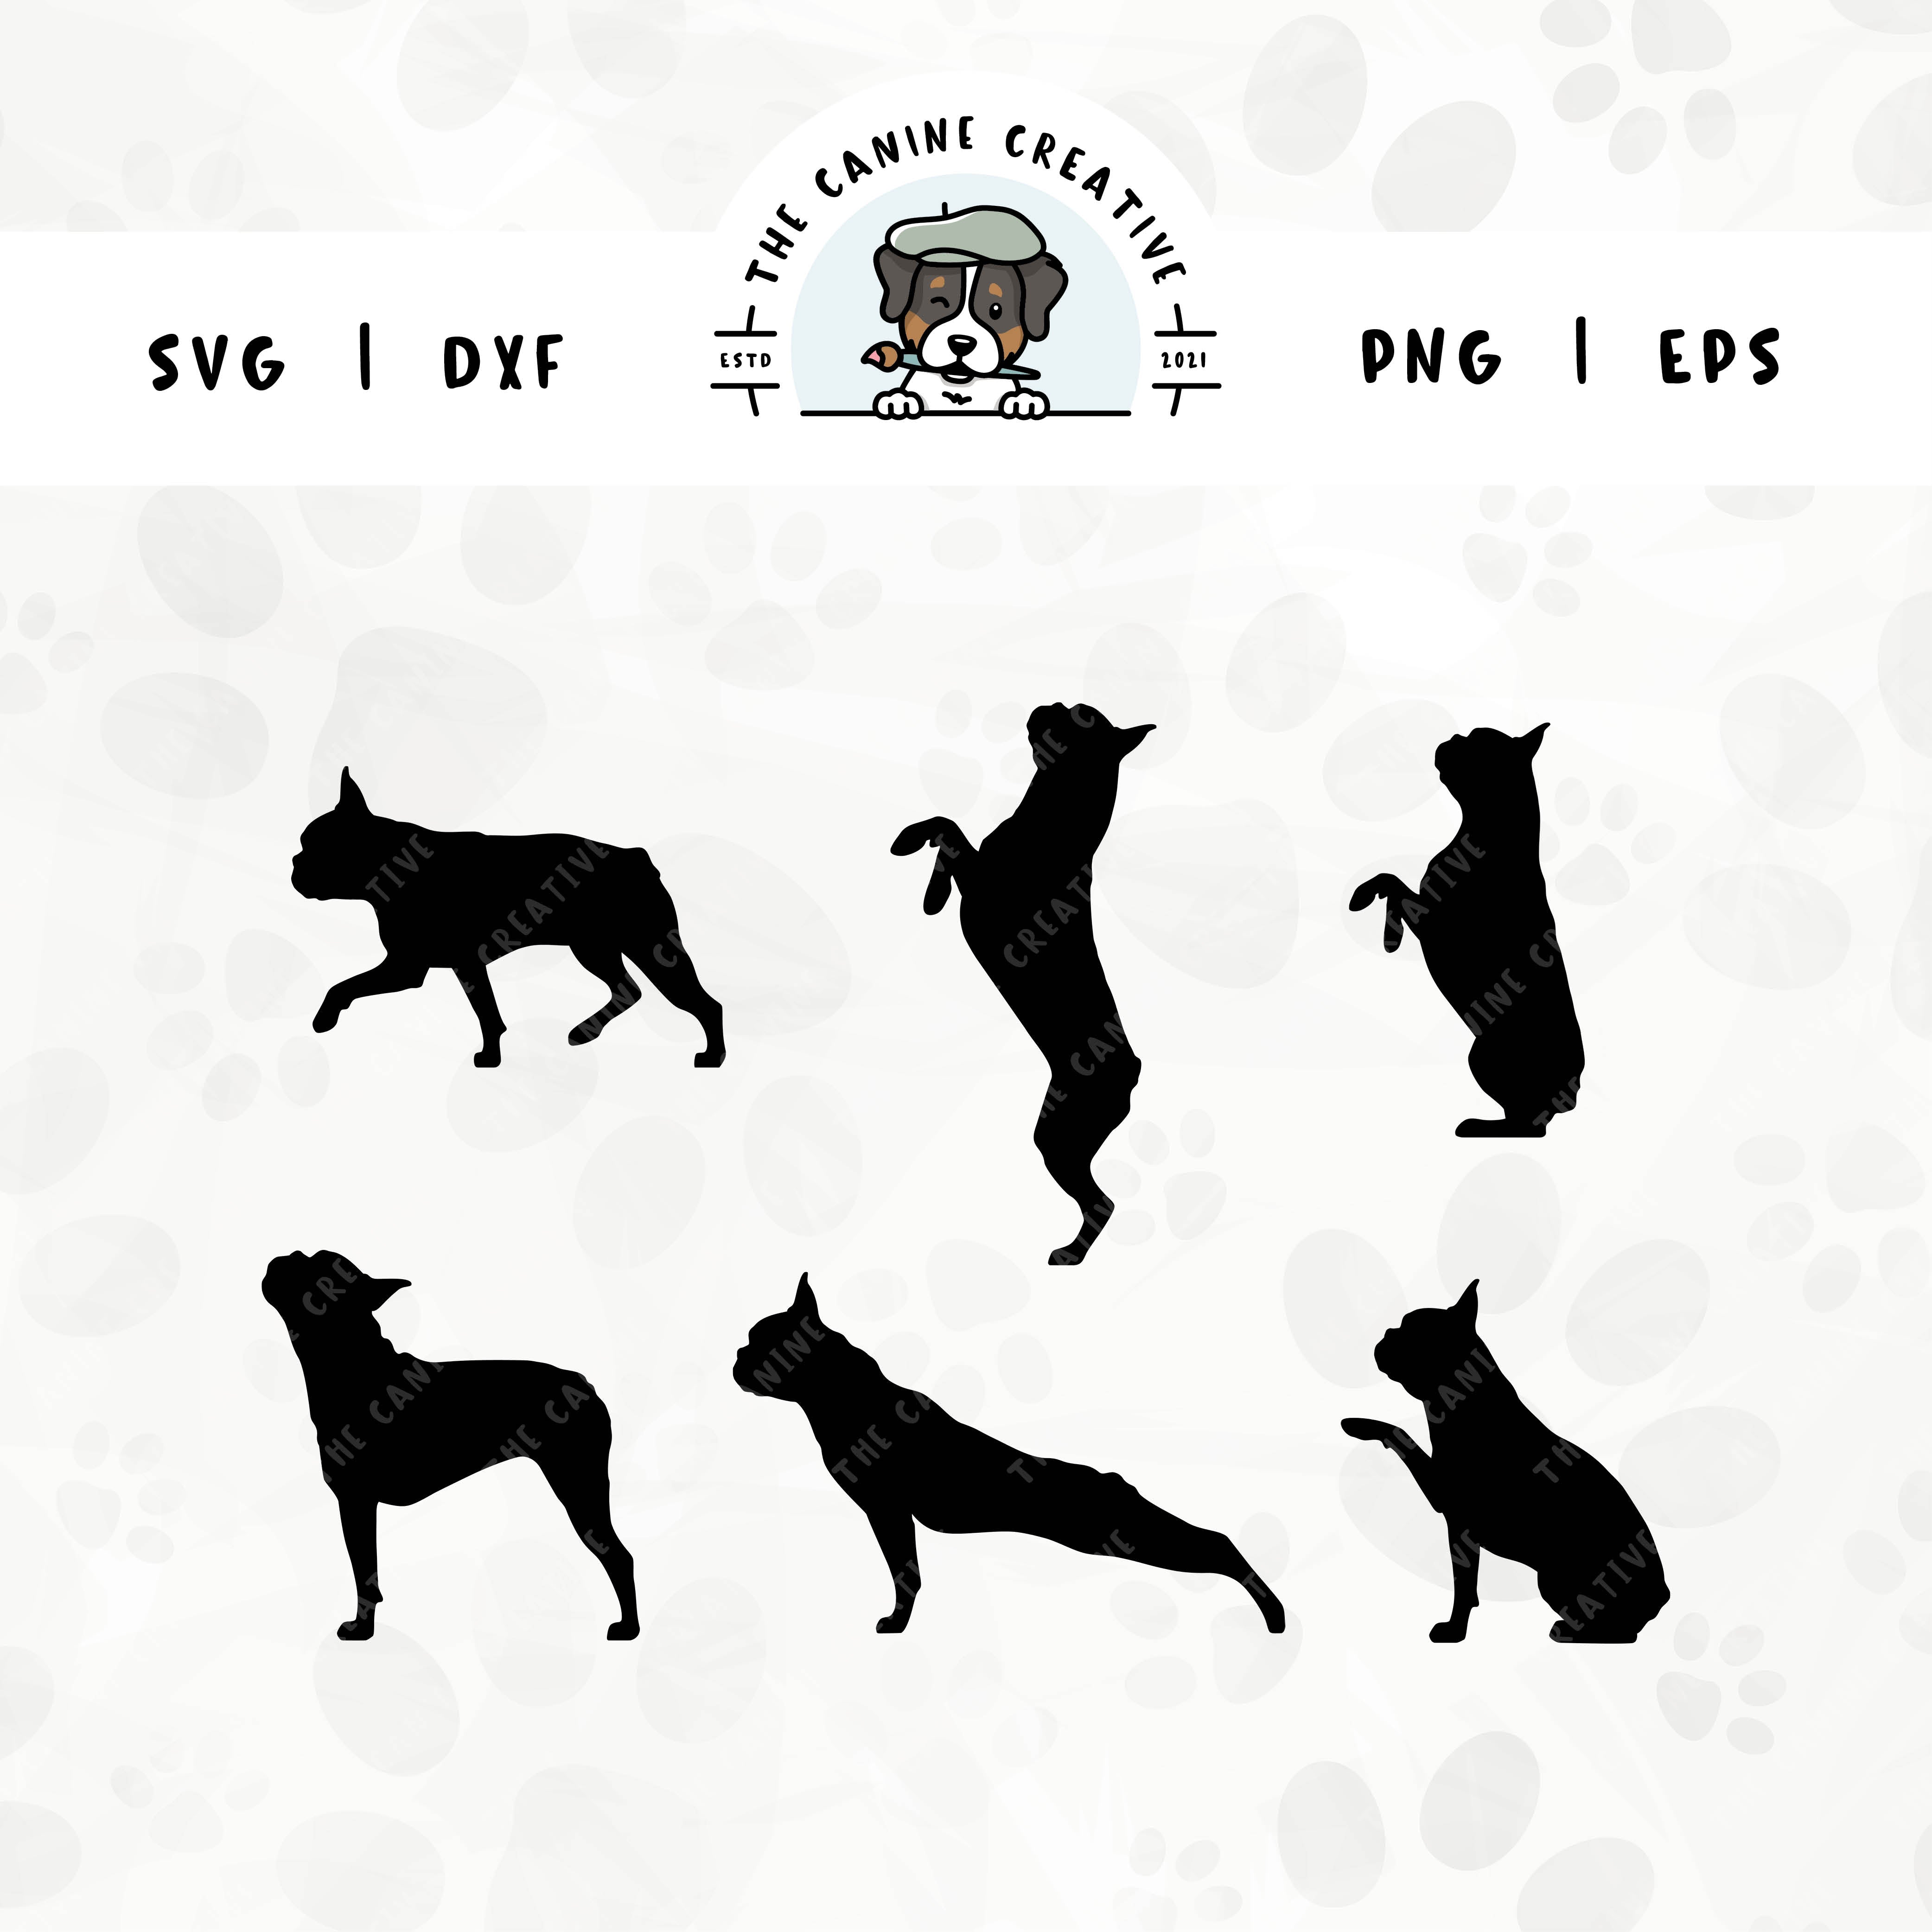 This 6-pack Boston Terrier silhouette bundle (set 2) features various poses including walking, jumping up, begging, barking, sniffing, and shaking paw. File formats include: SVG, DXF, PNG, and EPS.